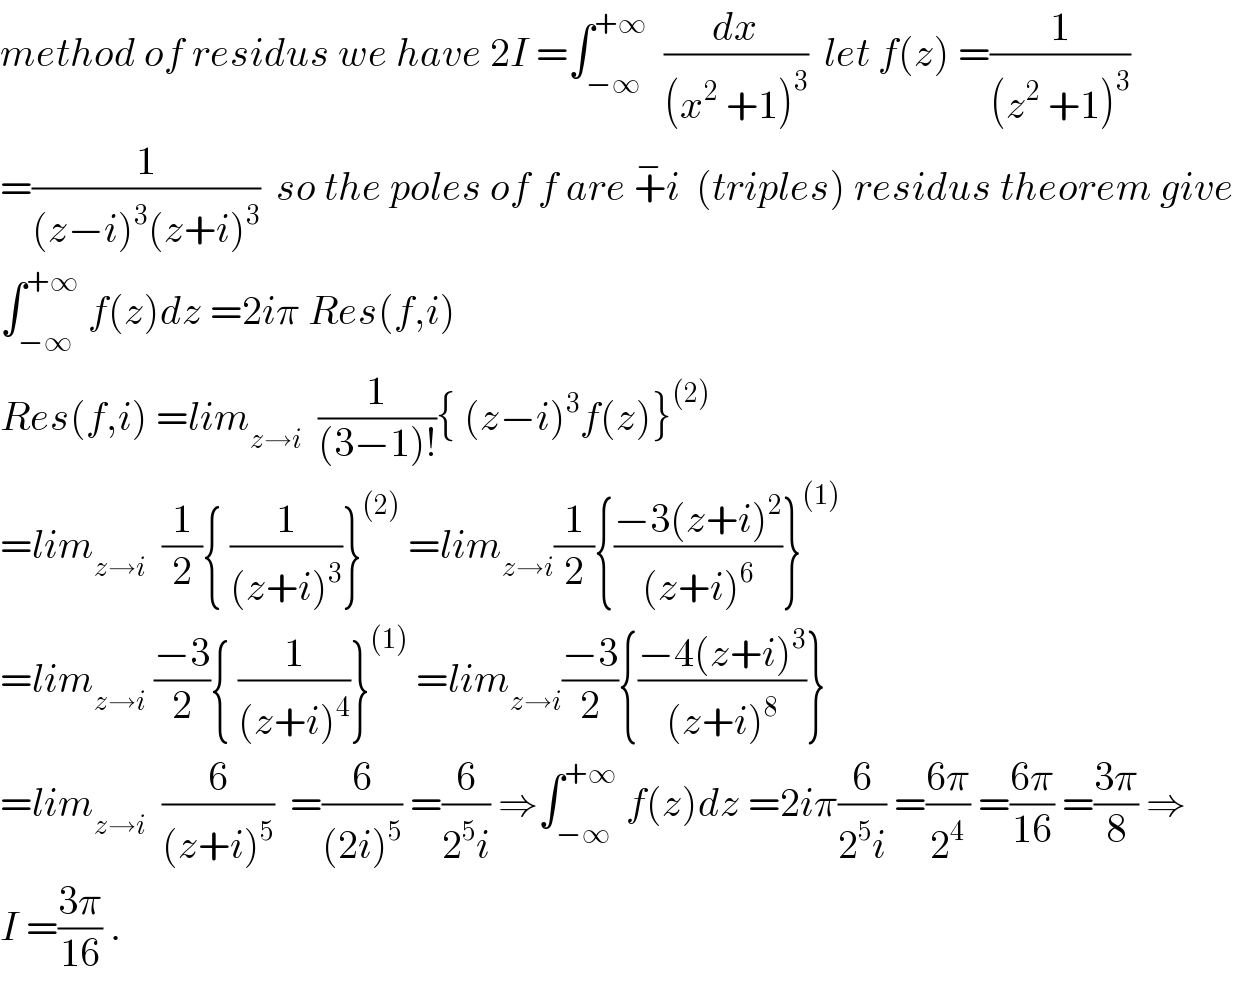 method of residus we have 2I =∫_(−∞) ^(+∞)   (dx/((x^2  +1)^3 ))  let f(z) =(1/((z^2  +1)^3 ))  =(1/((z−i)^3 (z+i)^3 ))  so the poles of f are +^− i  (triples) residus theorem give  ∫_(−∞) ^(+∞)  f(z)dz =2iπ Res(f,i)  Res(f,i) =lim_(z→i)   (1/((3−1)!)){ (z−i)^3 f(z)}^((2))   =lim_(z→i)   (1/2){ (1/((z+i)^3 ))}^((2))  =lim_(z→i) (1/2){((−3(z+i)^2 )/((z+i)^6 ))}^((1))   =lim_(z→i)  ((−3)/2){ (1/((z+i)^4 ))}^((1))  =lim_(z→i) ((−3)/2){((−4(z+i)^3 )/((z+i)^8 ))}  =lim_(z→i)   (6/((z+i)^5 ))  =(6/((2i)^5 )) =(6/(2^5 i)) ⇒∫_(−∞) ^(+∞)  f(z)dz =2iπ(6/(2^5 i)) =((6π)/2^4 ) =((6π)/(16)) =((3π)/8) ⇒  I =((3π)/(16)) .  